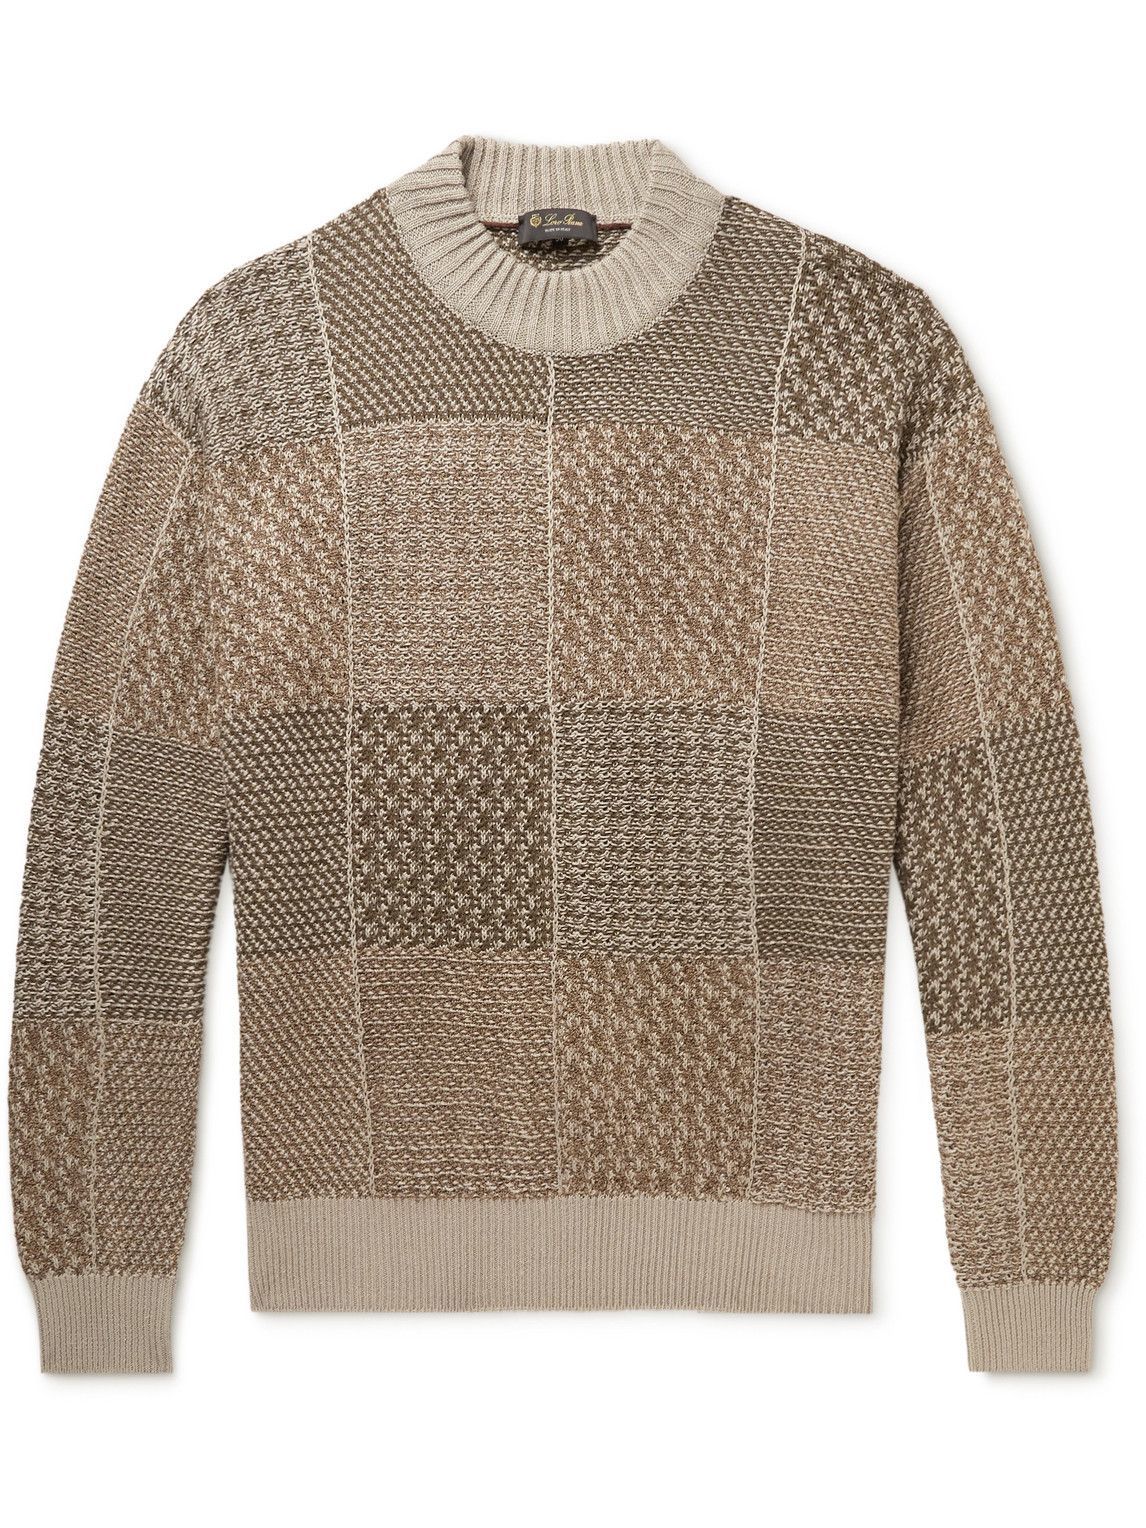 Loro Piana - Cable-Knit Cashmere, Silk and Cotton-Blend Sweater 